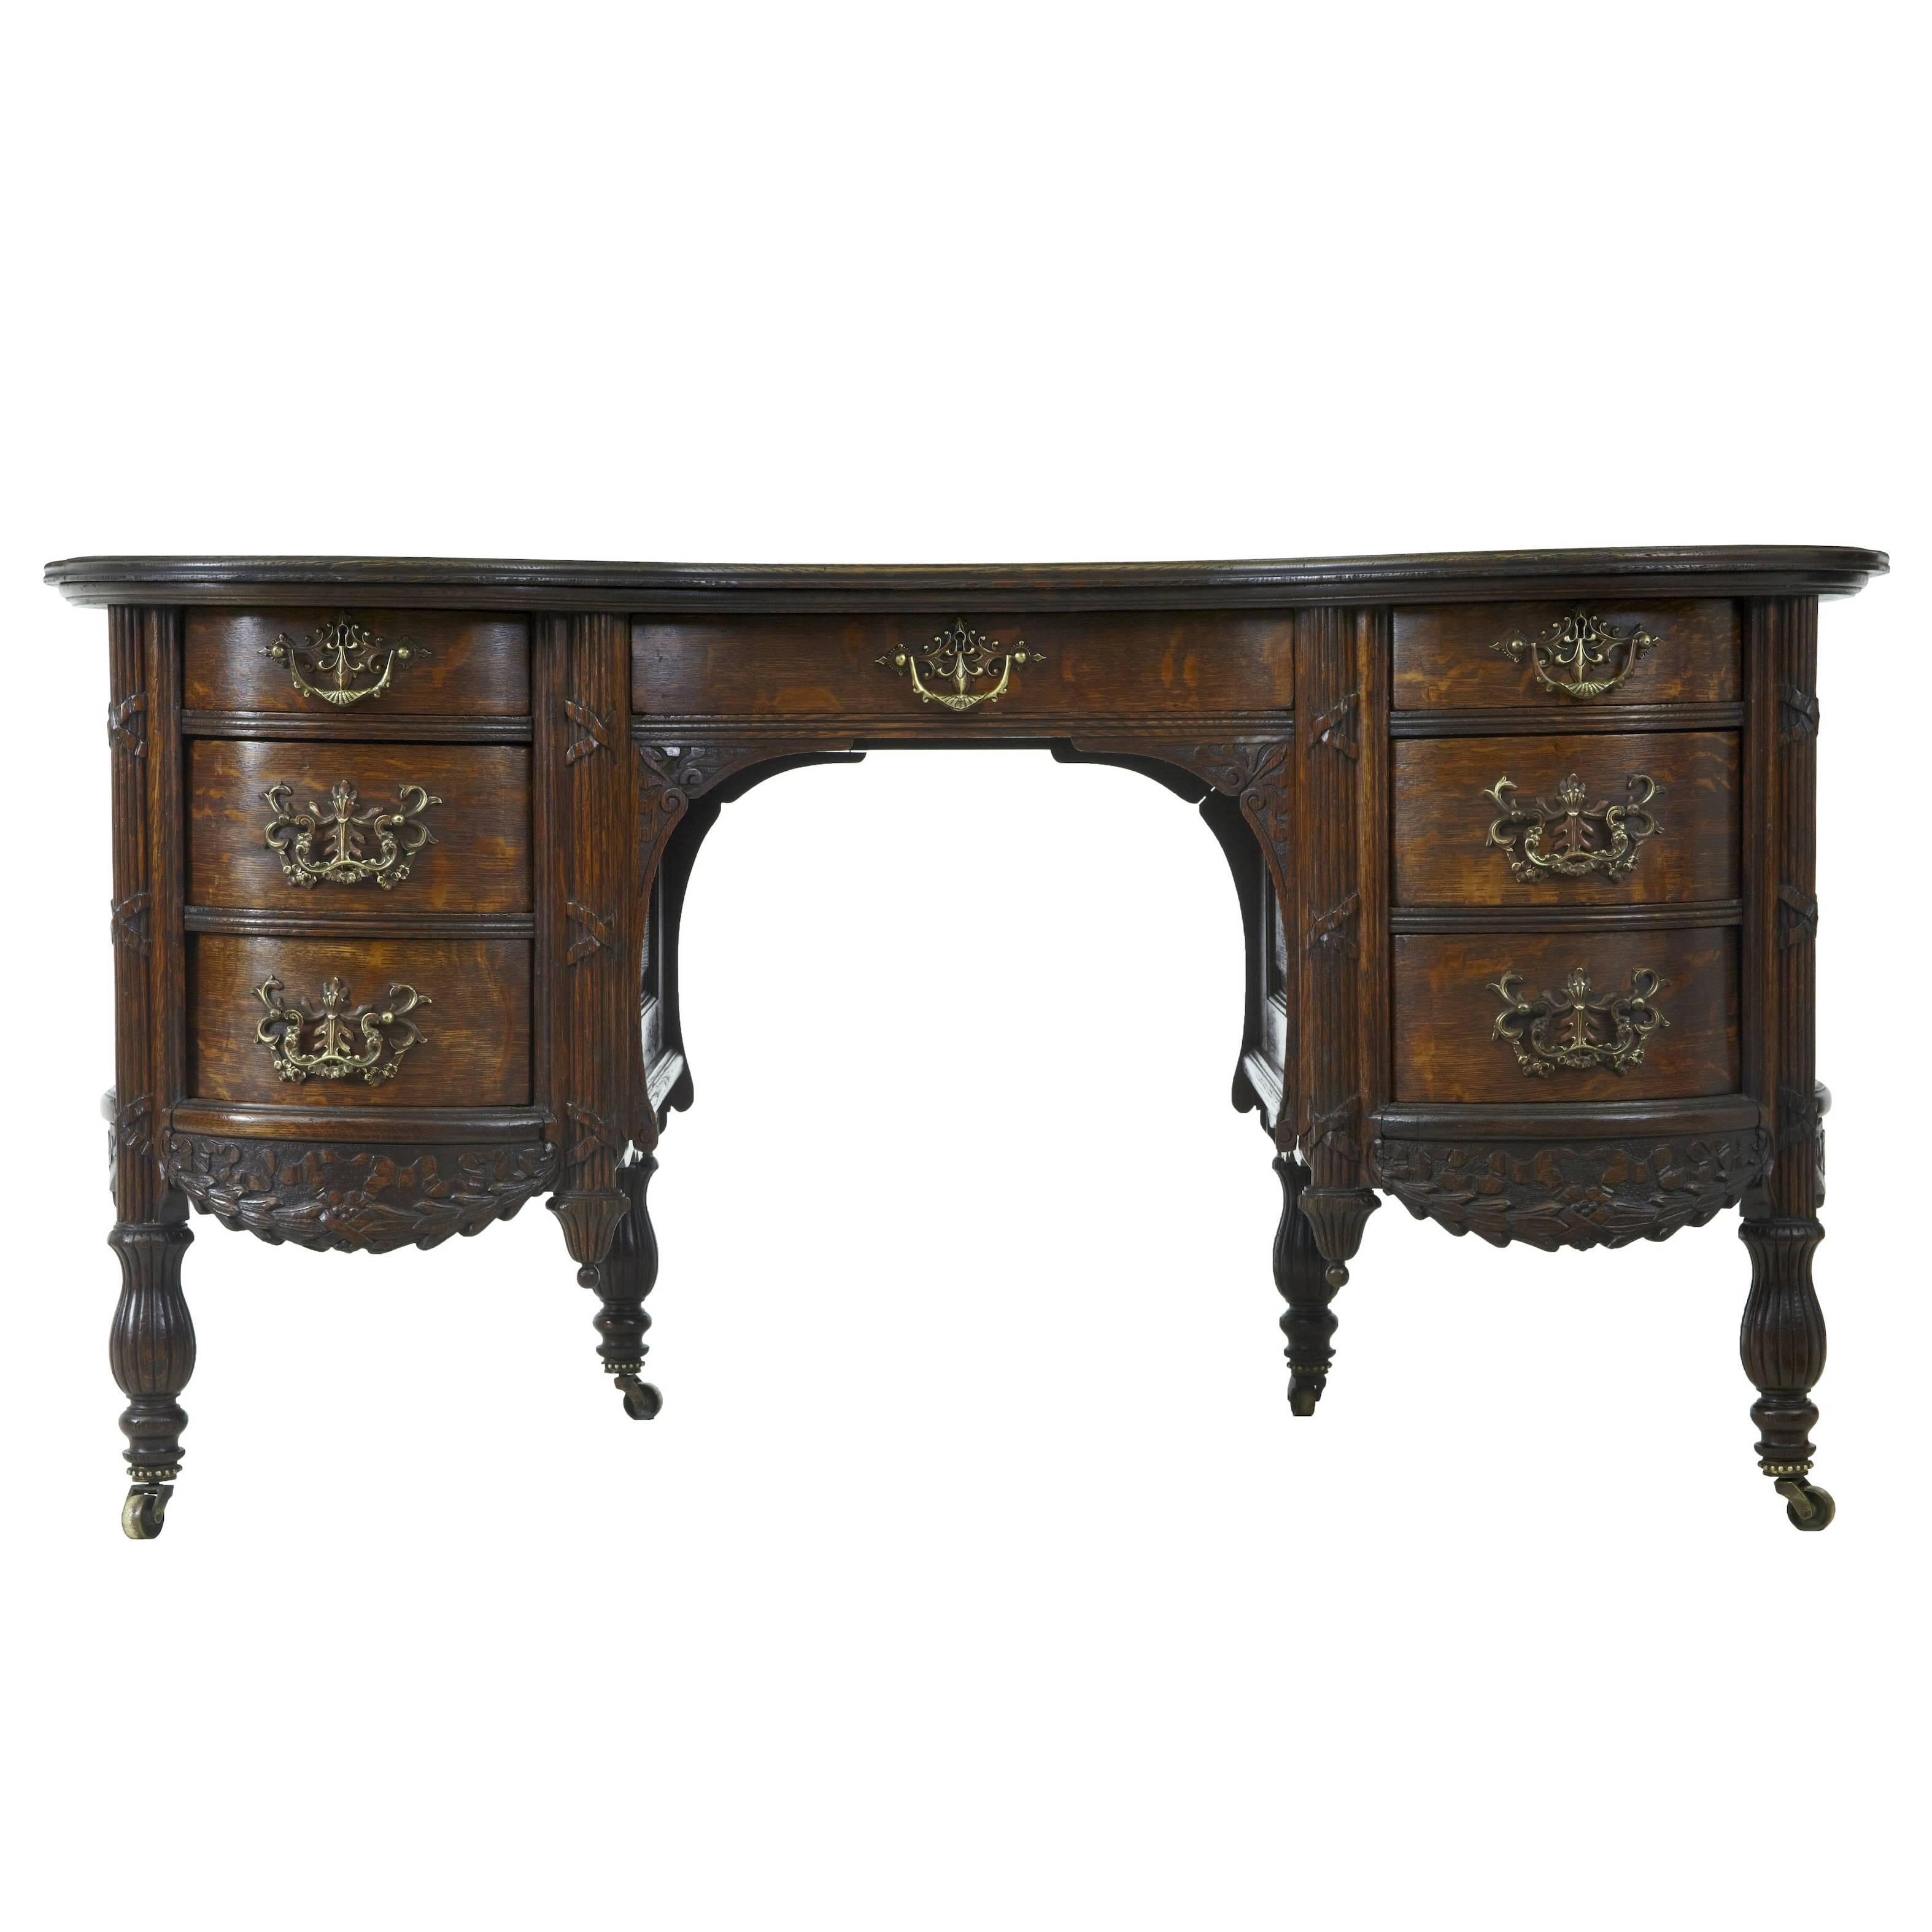 Late 19th Century Carved Oak Kidney Shaped Writing Desk